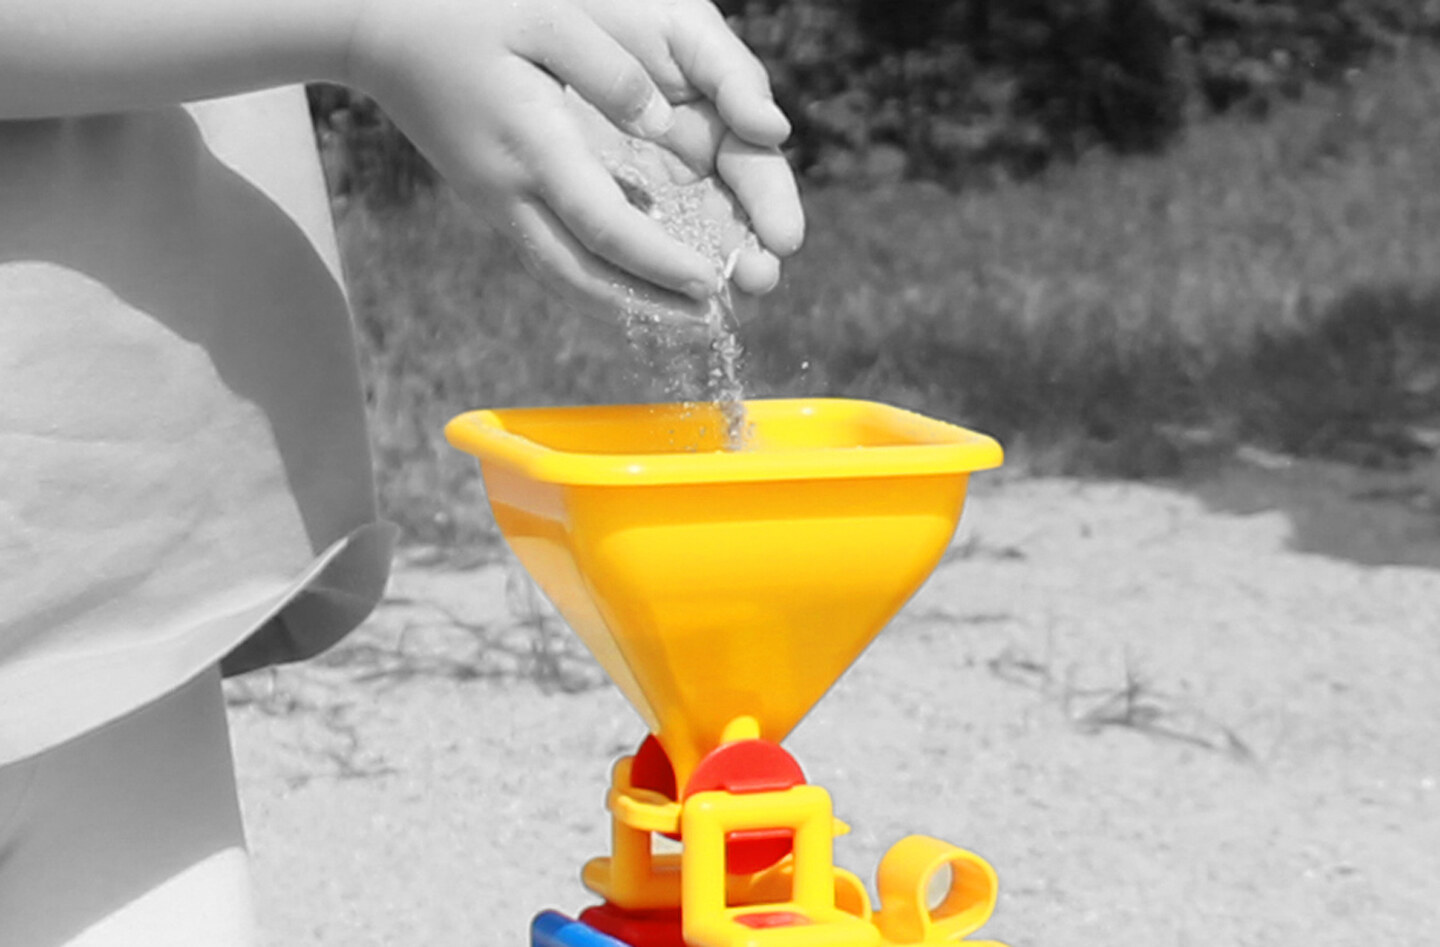 Children's hands filling sand into a yellow funnel of plasticant mobilo